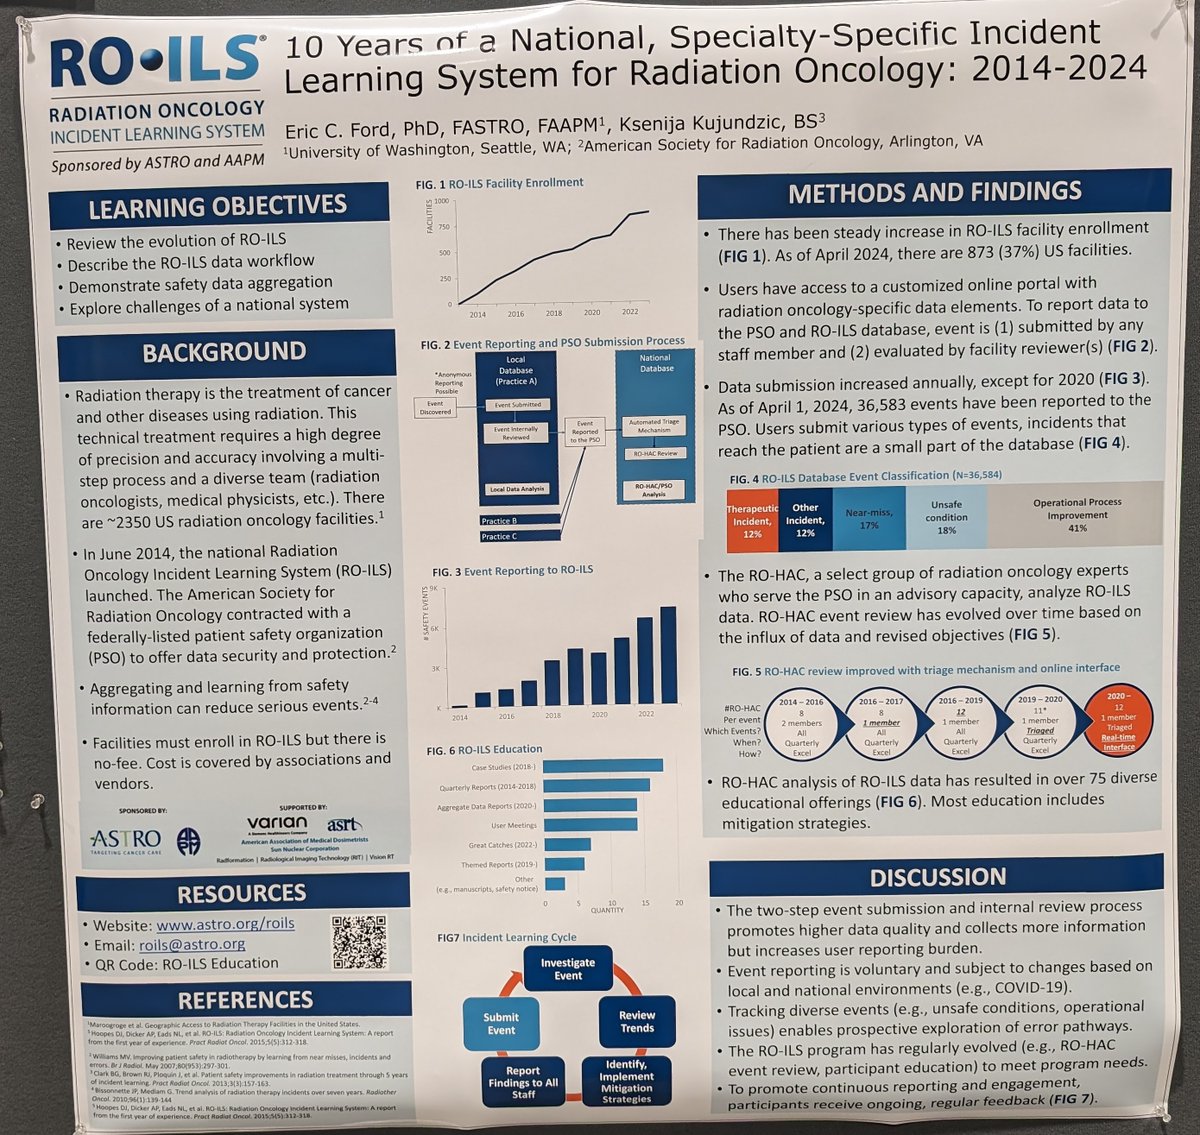 It is an honor to share the amazing work of our national #RadiationOncology incident learning system at the #IHICongress! So proud of a decade of RO-ILS and all our work for patient safety! @ASTRO_org